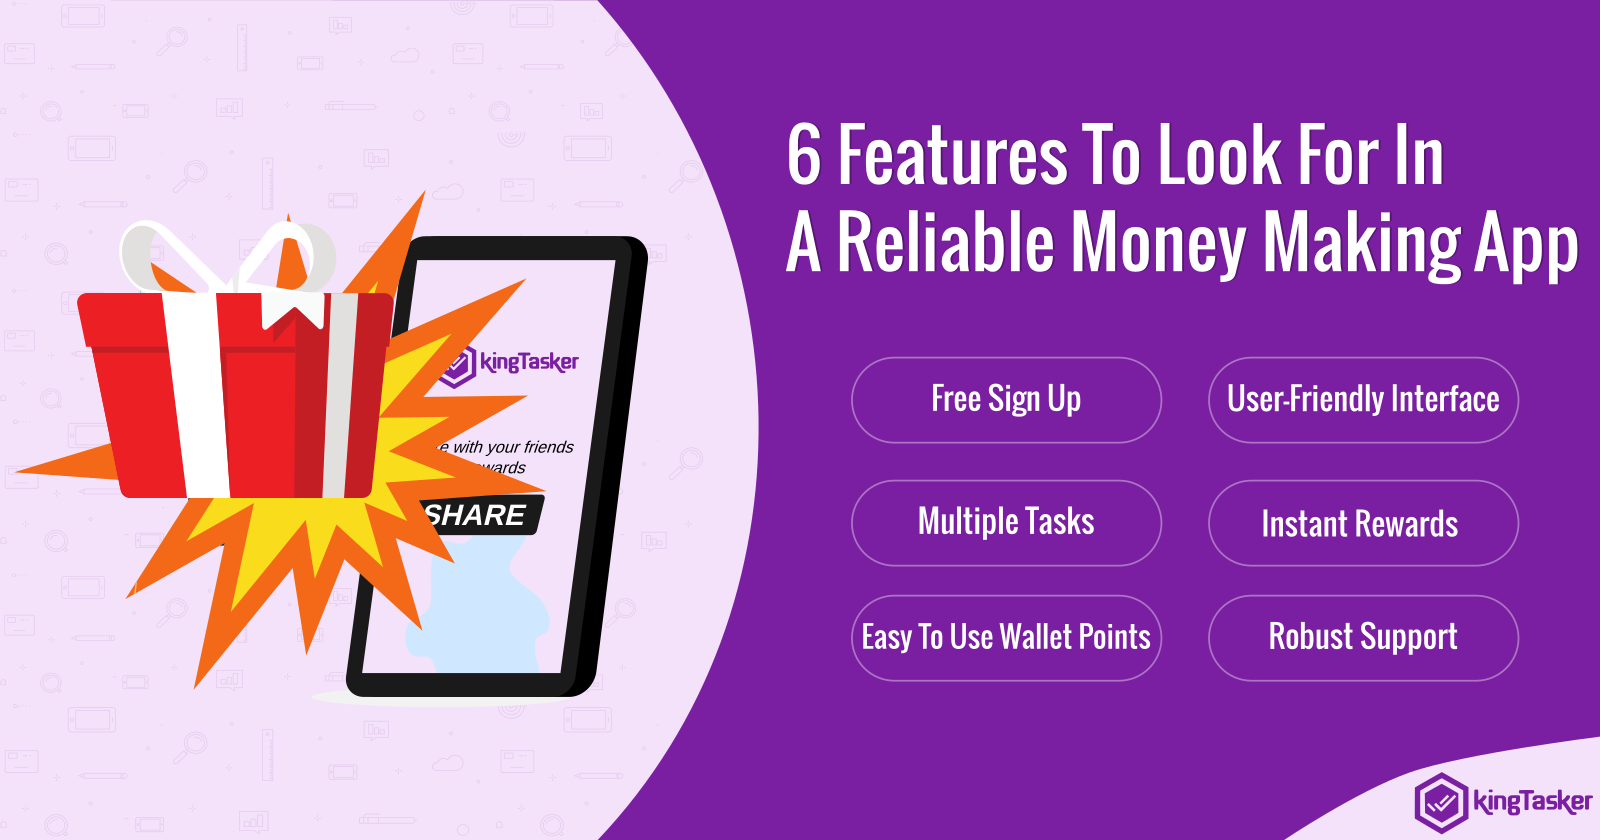 6 Features To Look For In A Reliable Money Making App